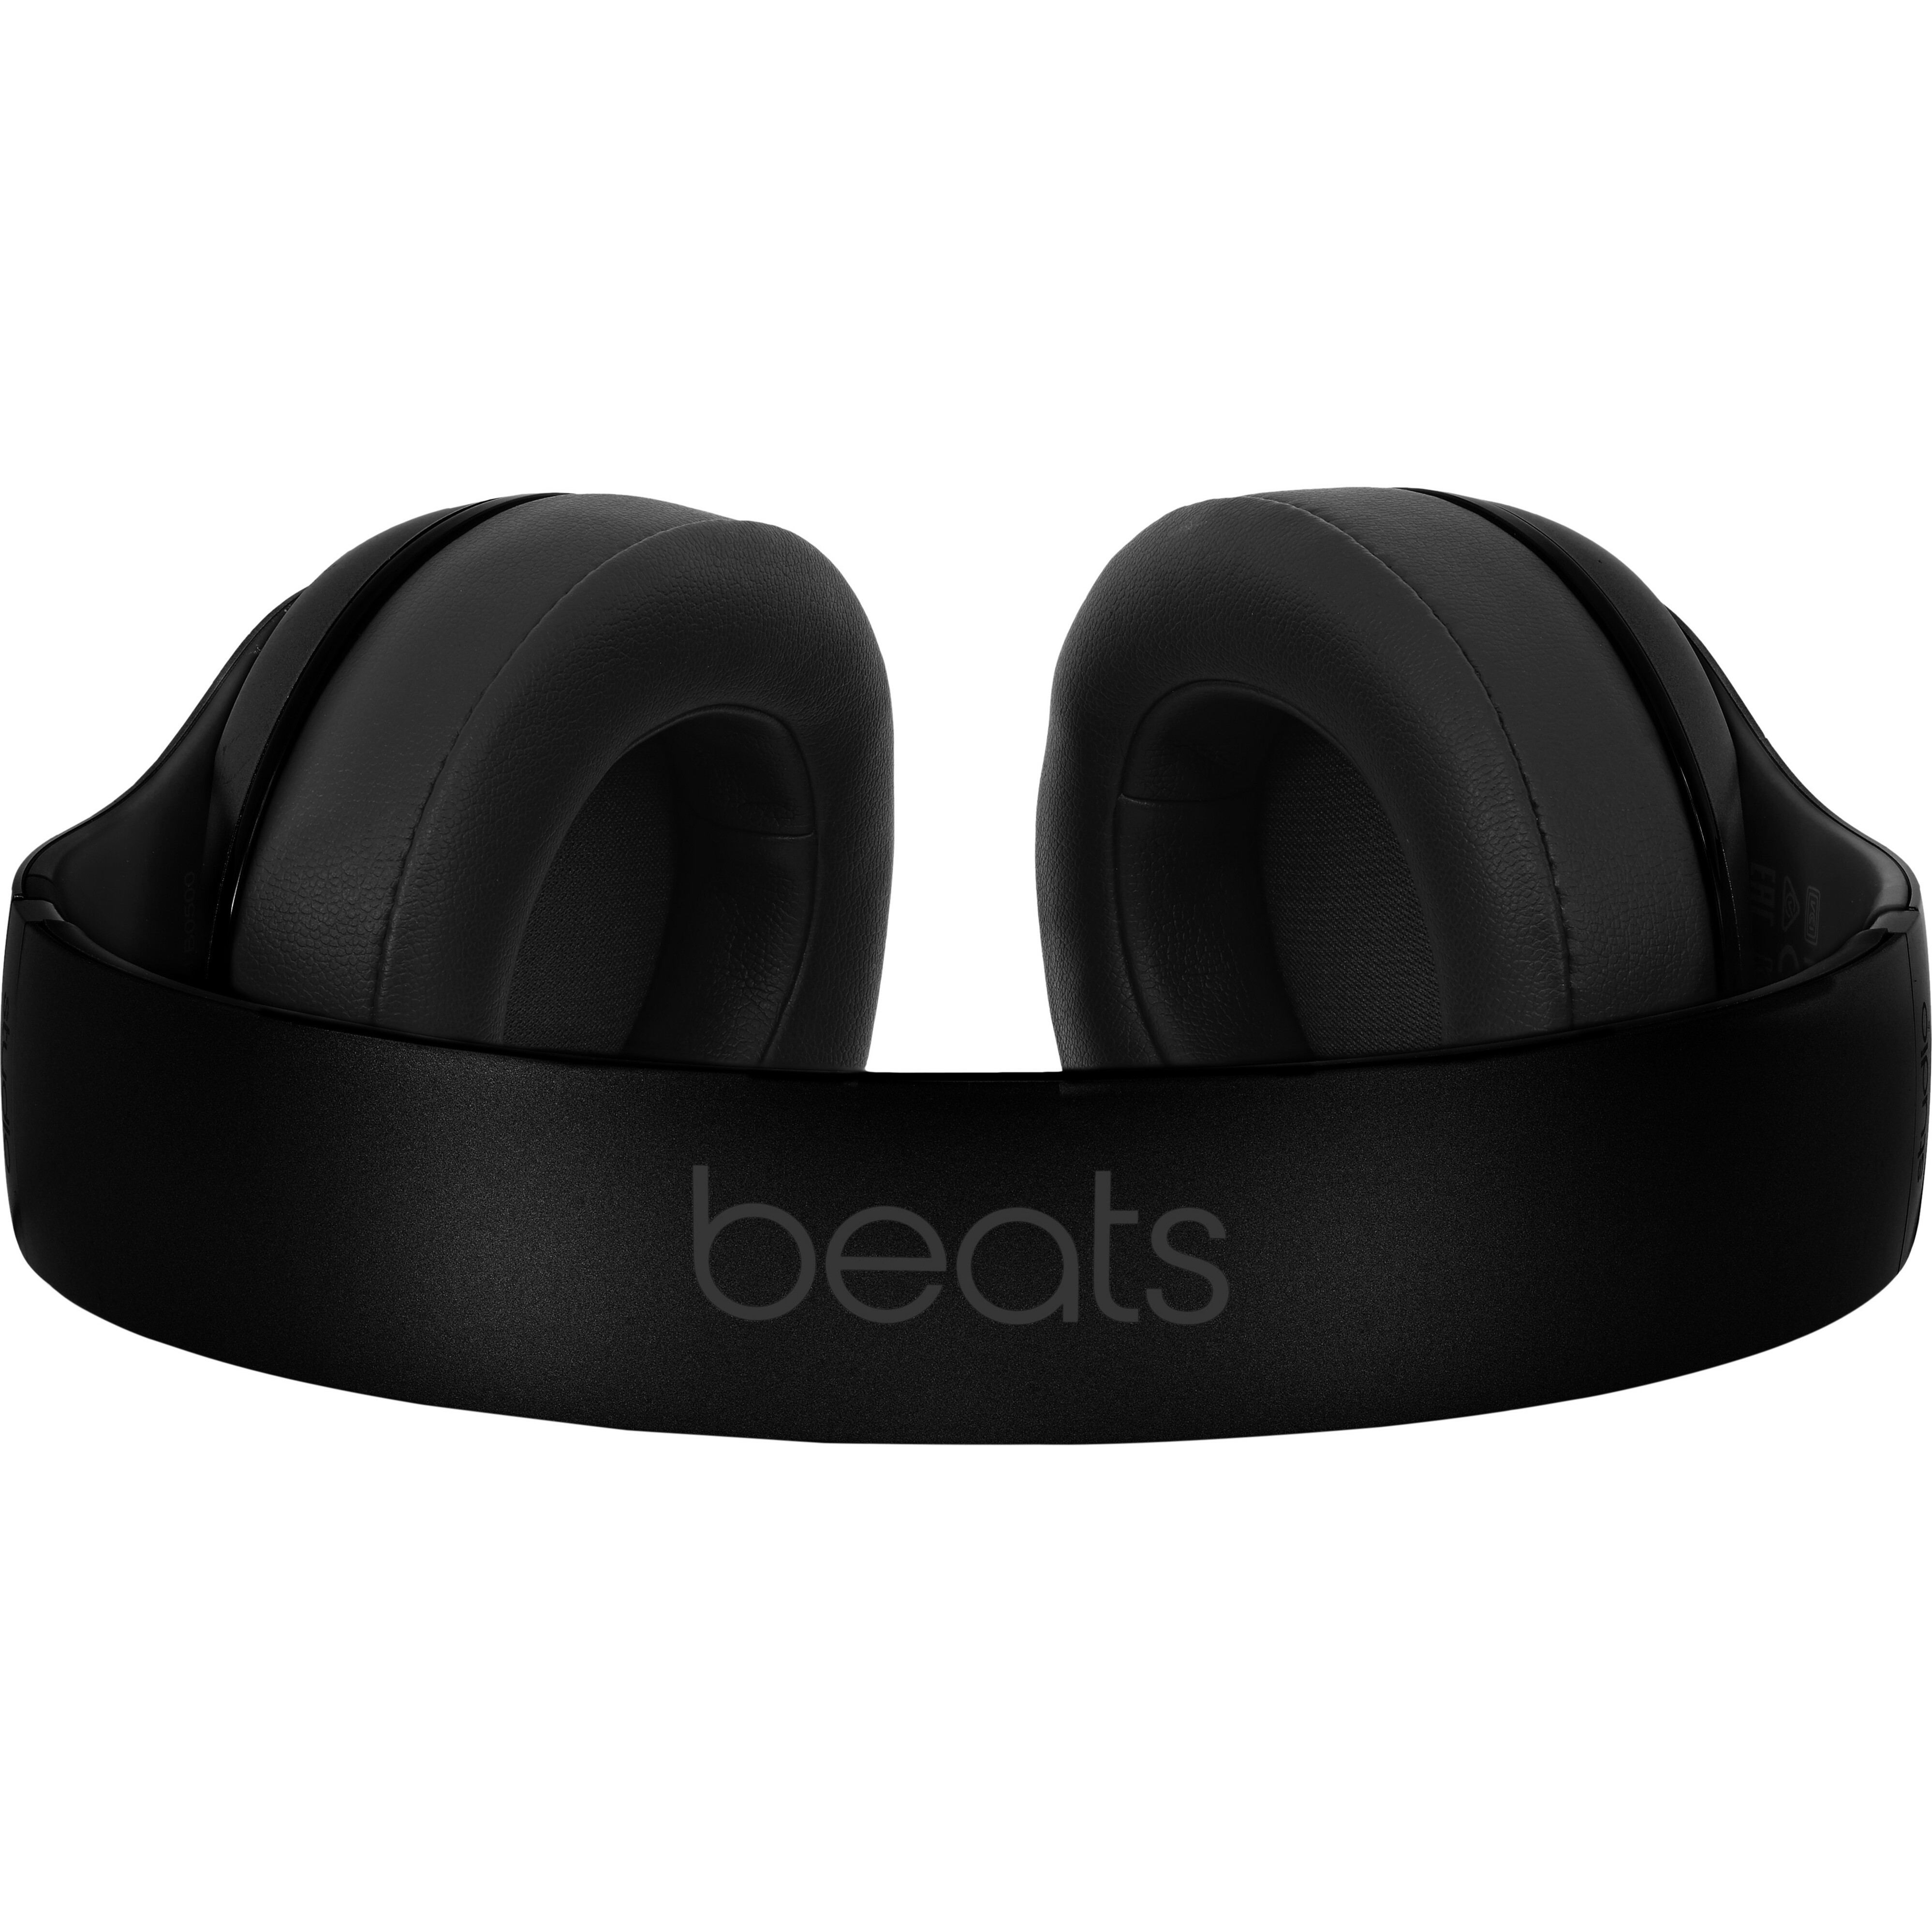 Beats by Dr. Dre Studio Wireless Over-Ear Headphones - image 5 of 6